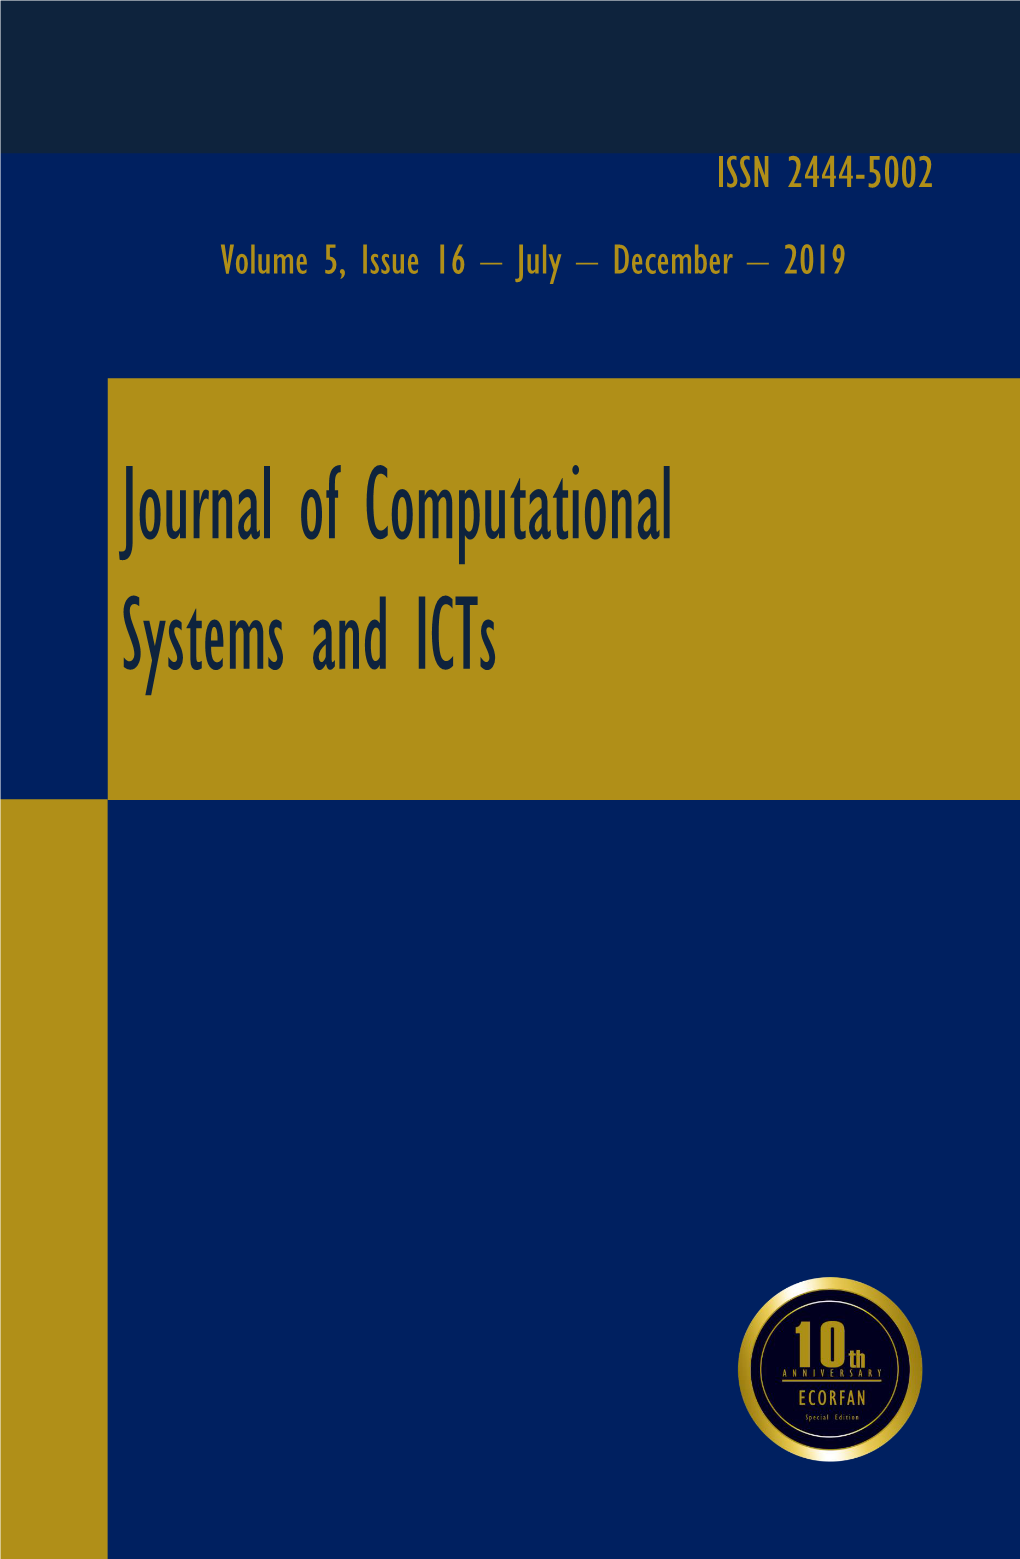 Journal of Computational Systems and Icts